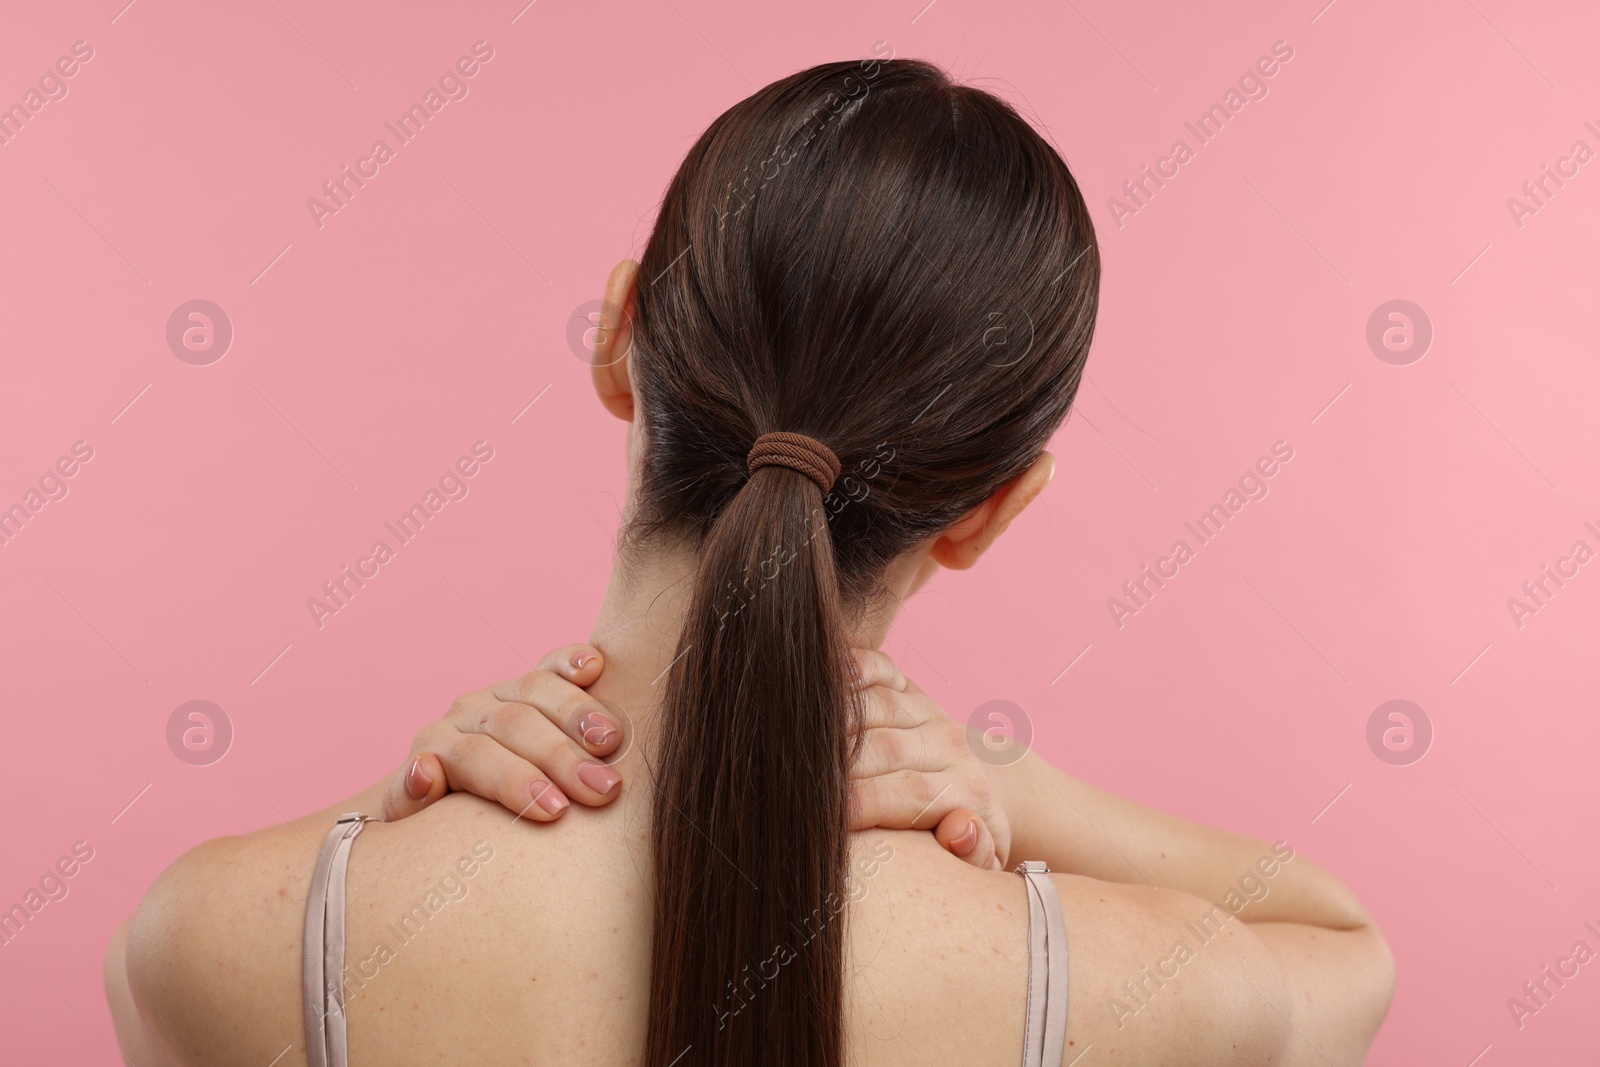 Photo of Woman touching her neck on pink background, back view